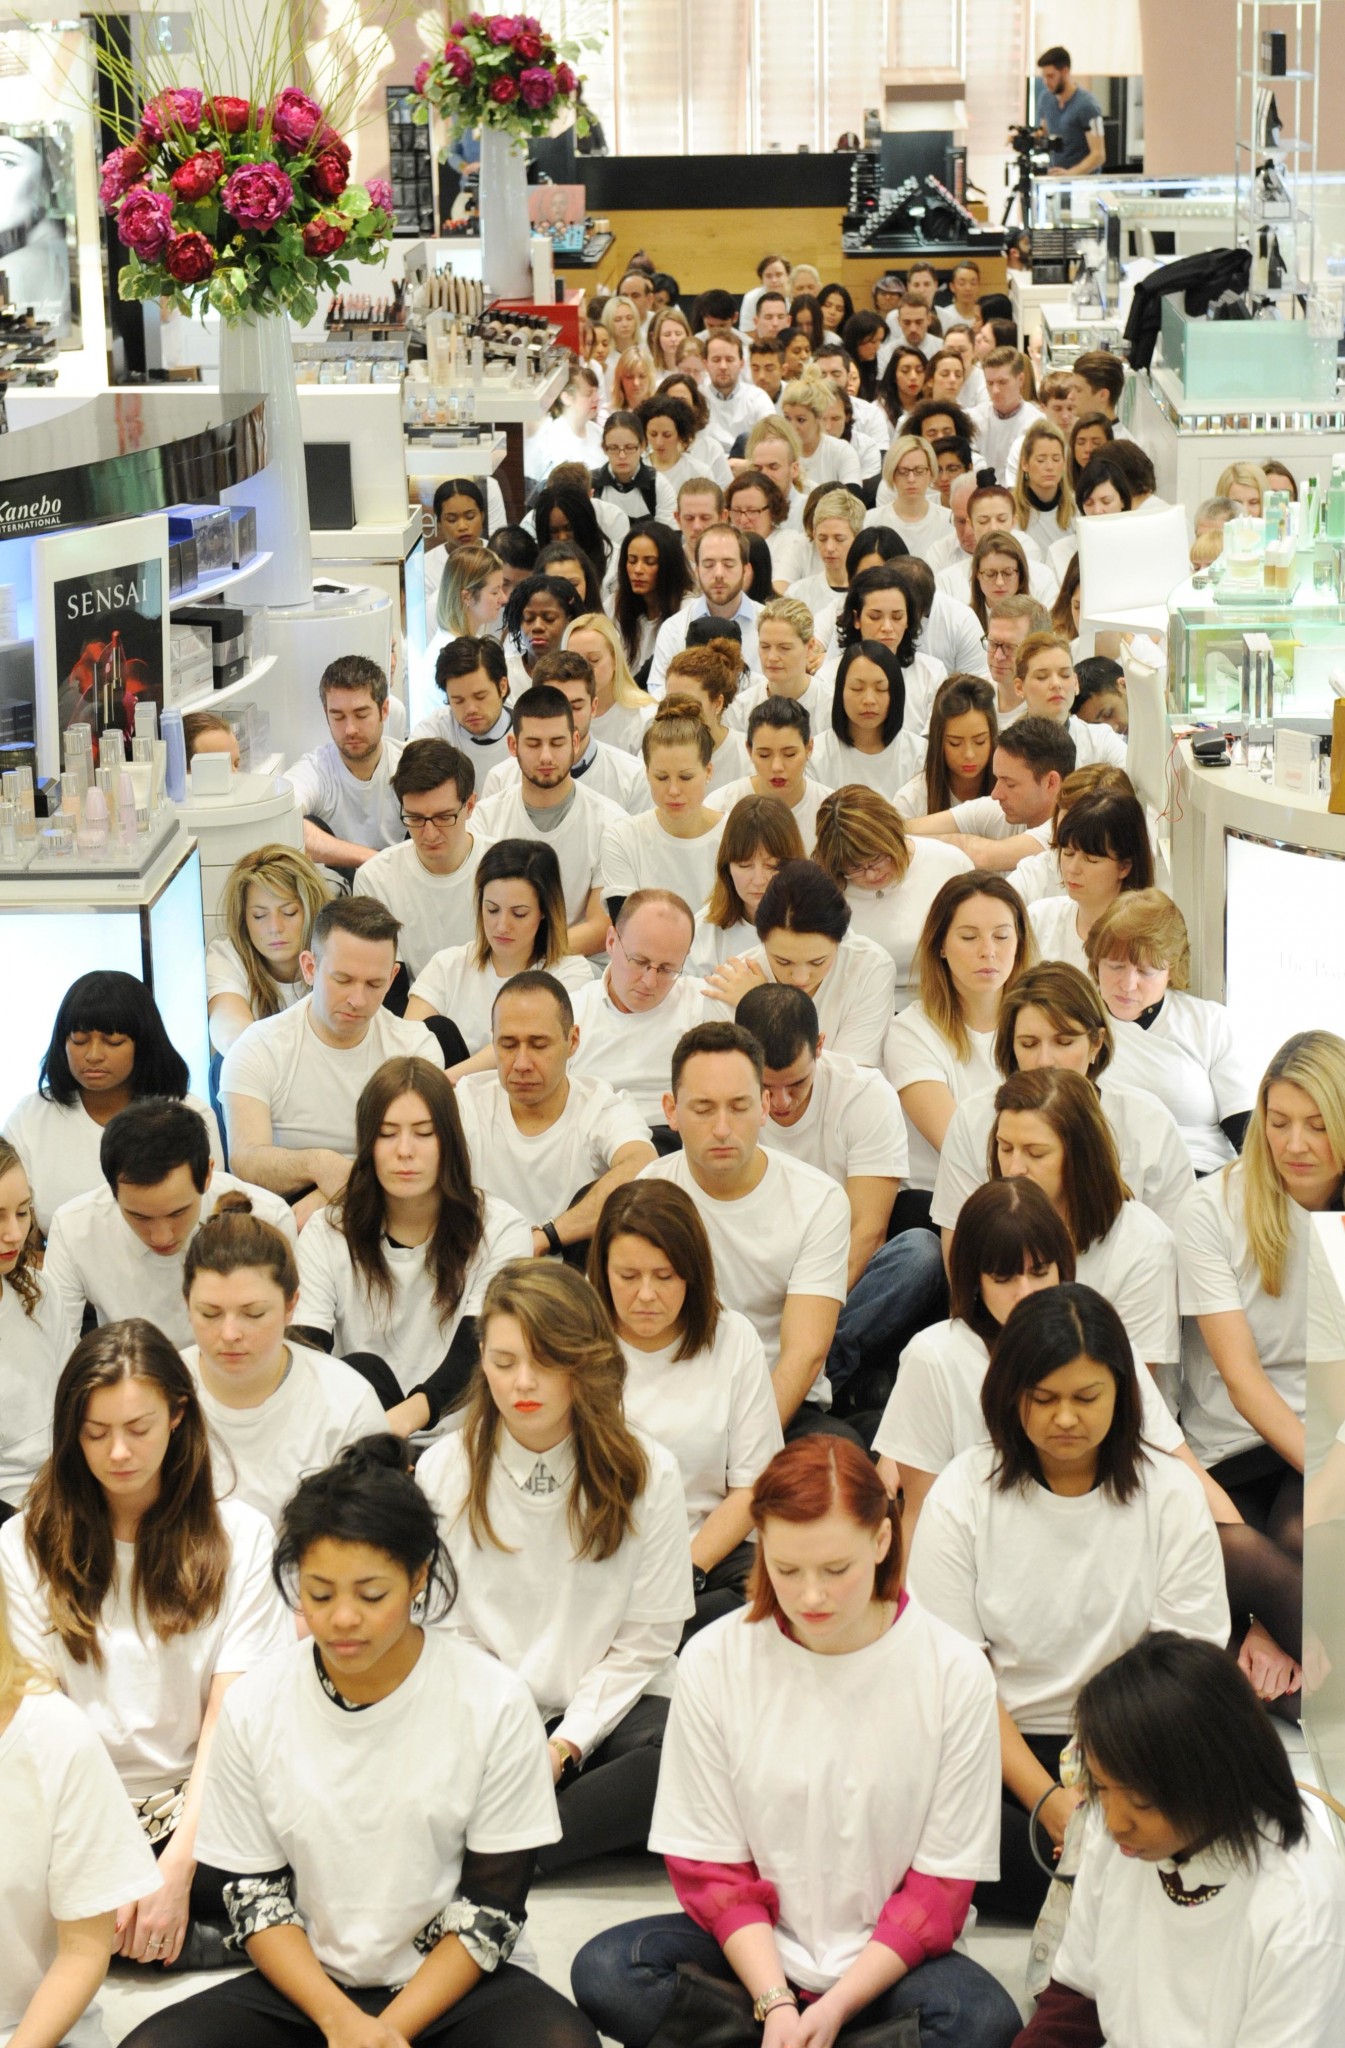 Five hundred people gather for a mass meditation led by Andy Puddicombe, Co founder of HEADspace and Alannah Weston, Selfridges Creative Director to launch No Noise at Selfridges on January 10, 2013 in London, England. (Photo by Stuart Wilson/Getty Images for Selfridges)